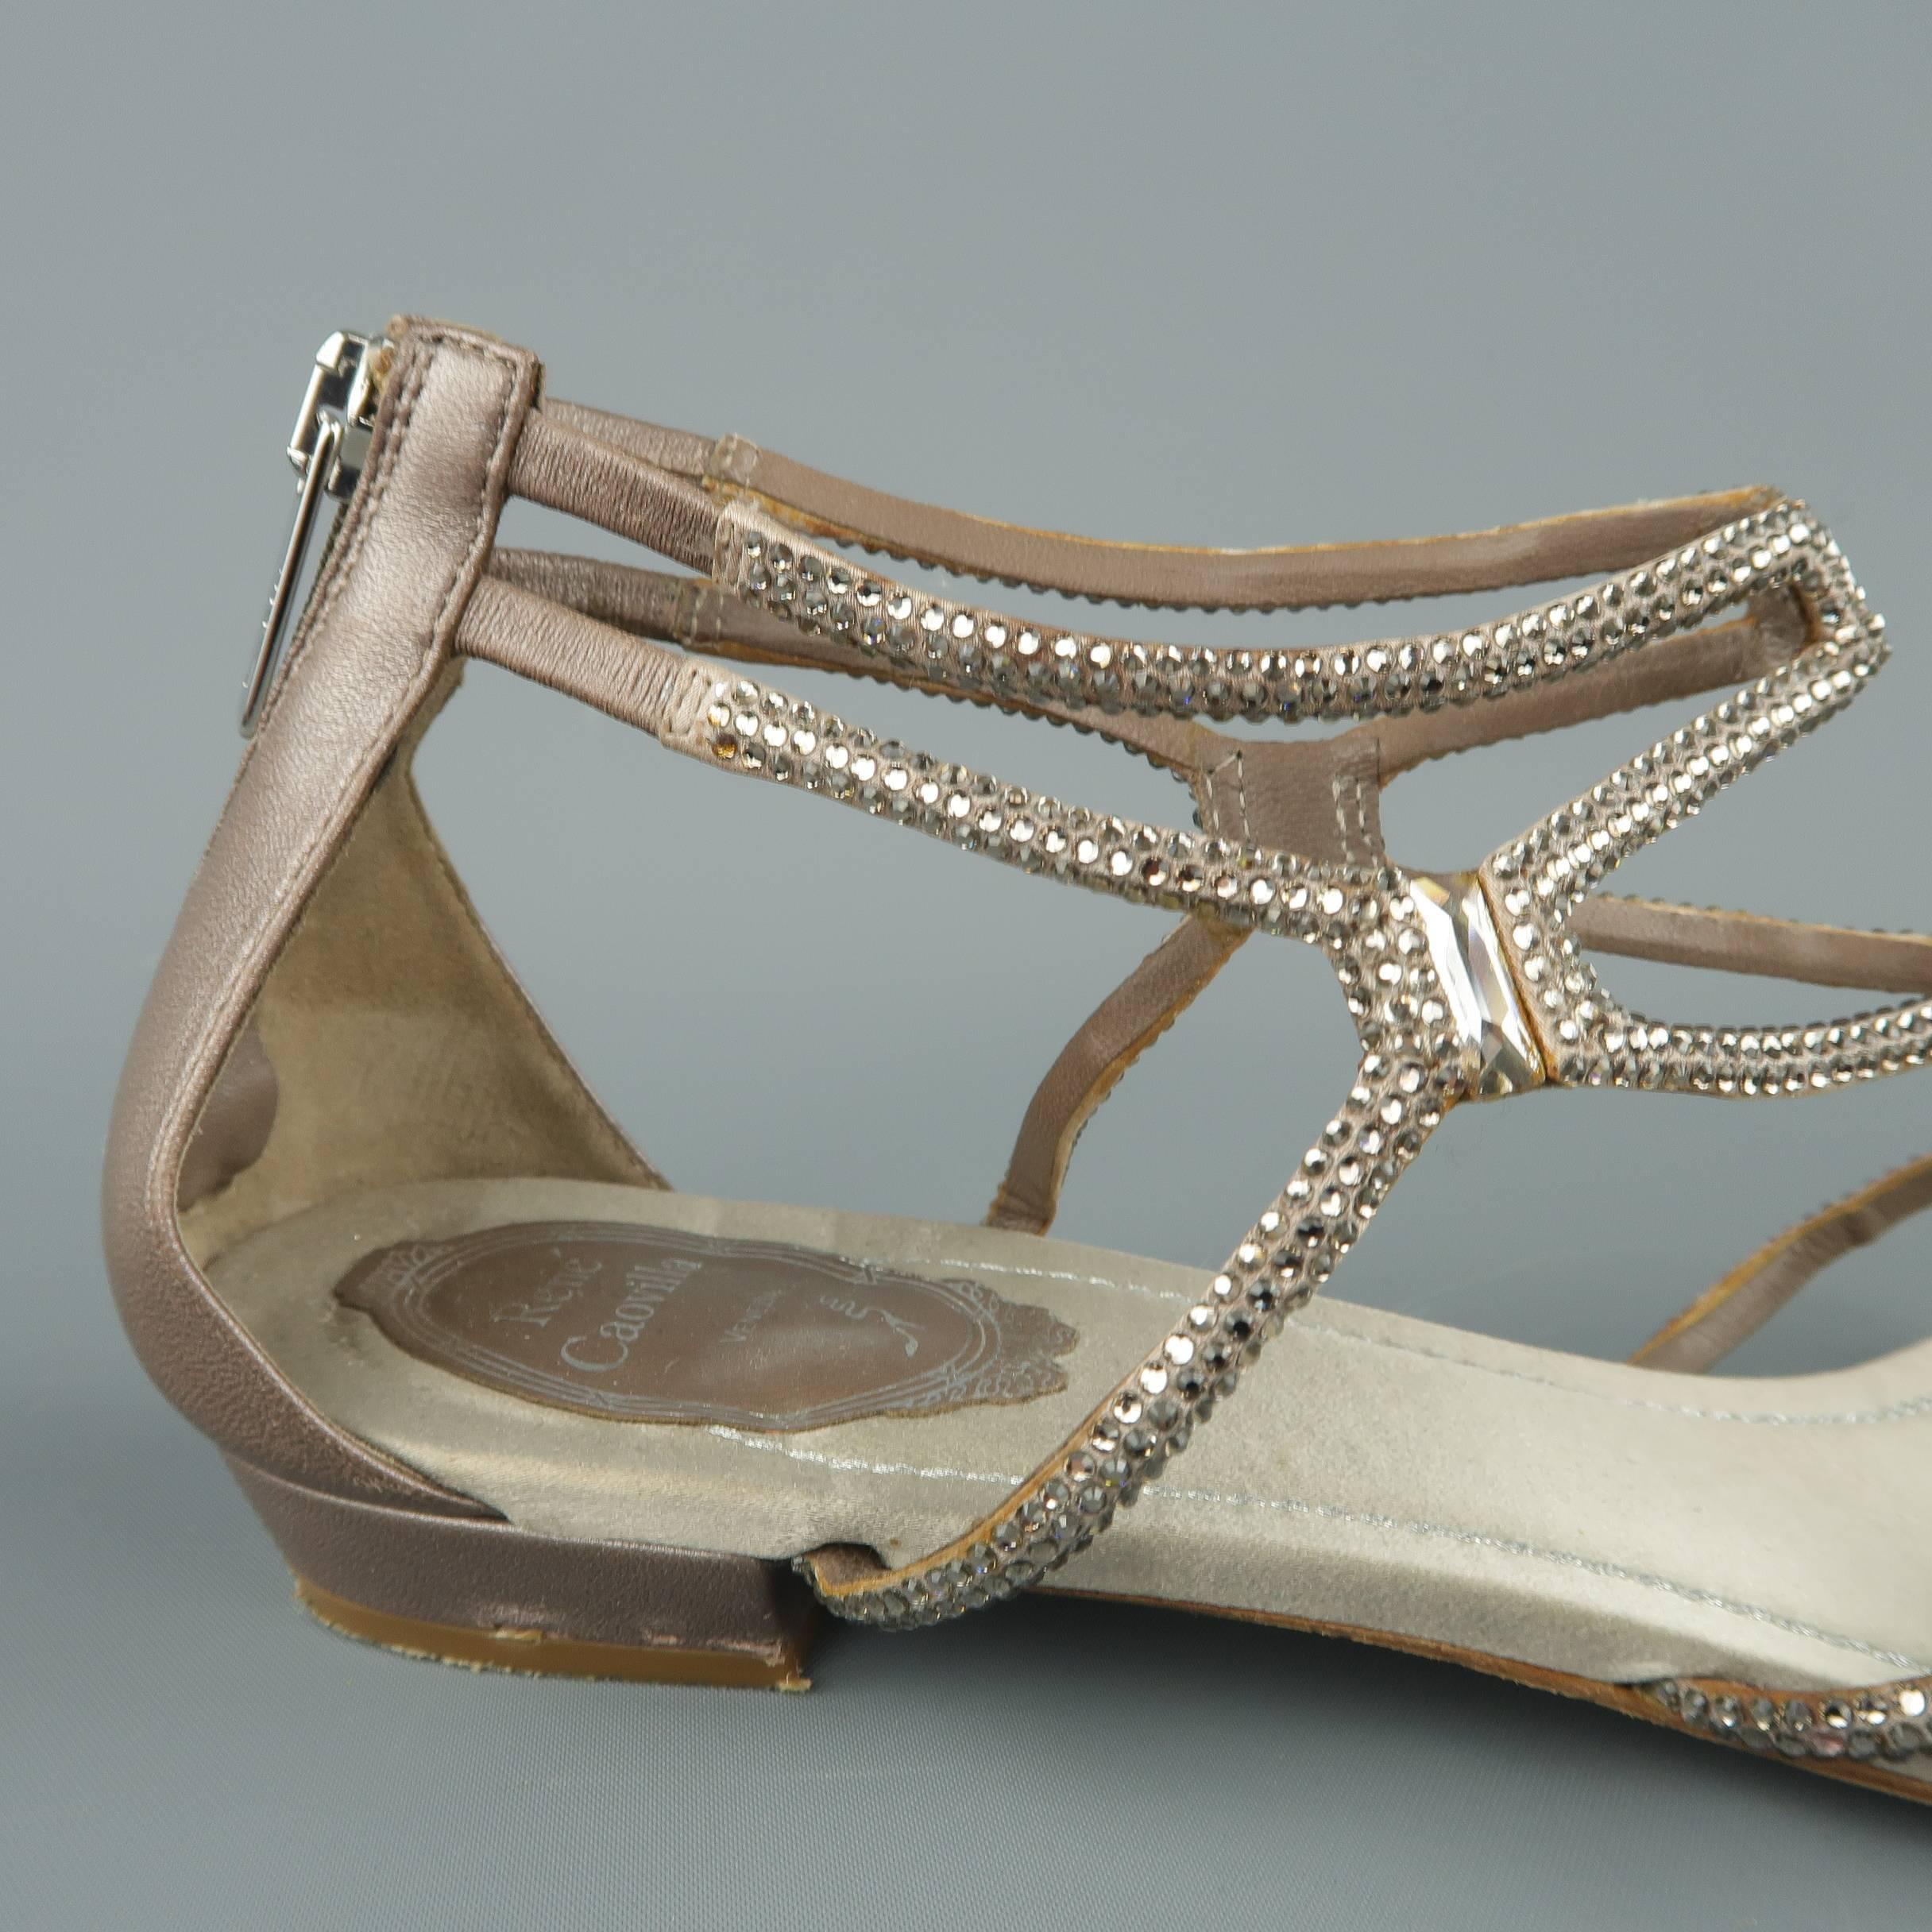 RENE CAOVILLA sandals come in tape suede and satin with a back zip closure and rhinestone studded cage strap front. Made in Italy.
 
Good Pre-Owned Condition.
Marked: IT 39.5
 
Outsole: 10 x 3.5 in.
